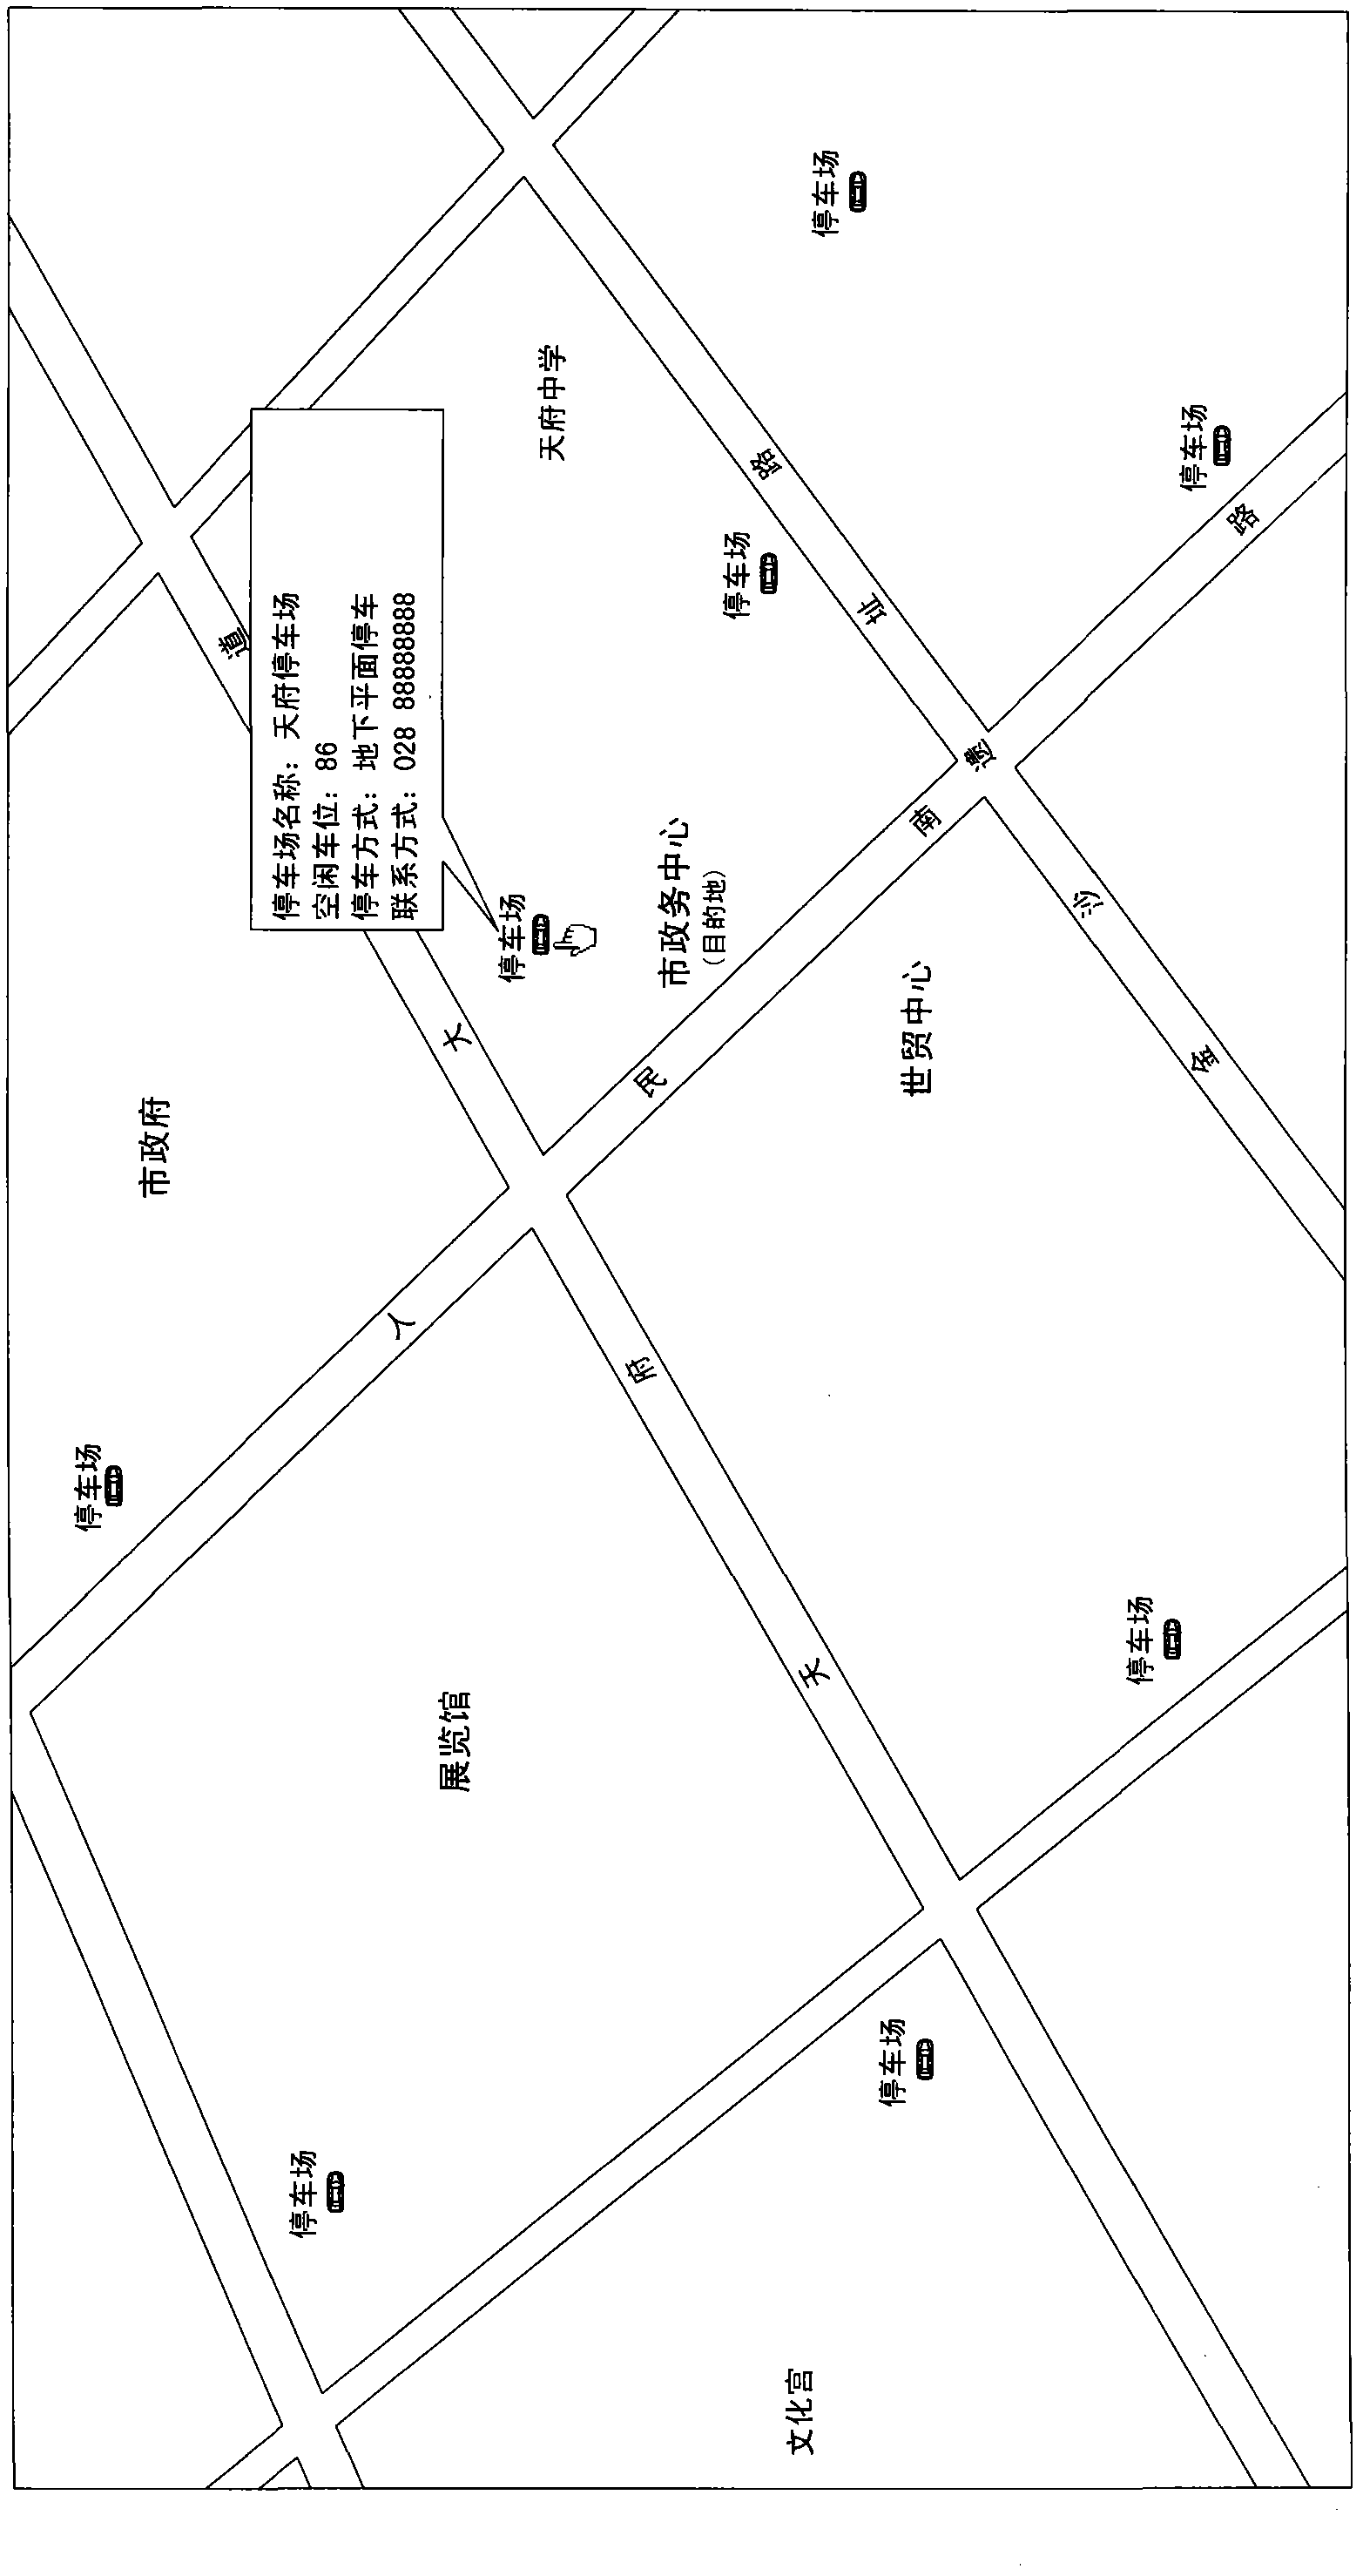 System for remotely inquiring and reserving parking spaces of parking lots